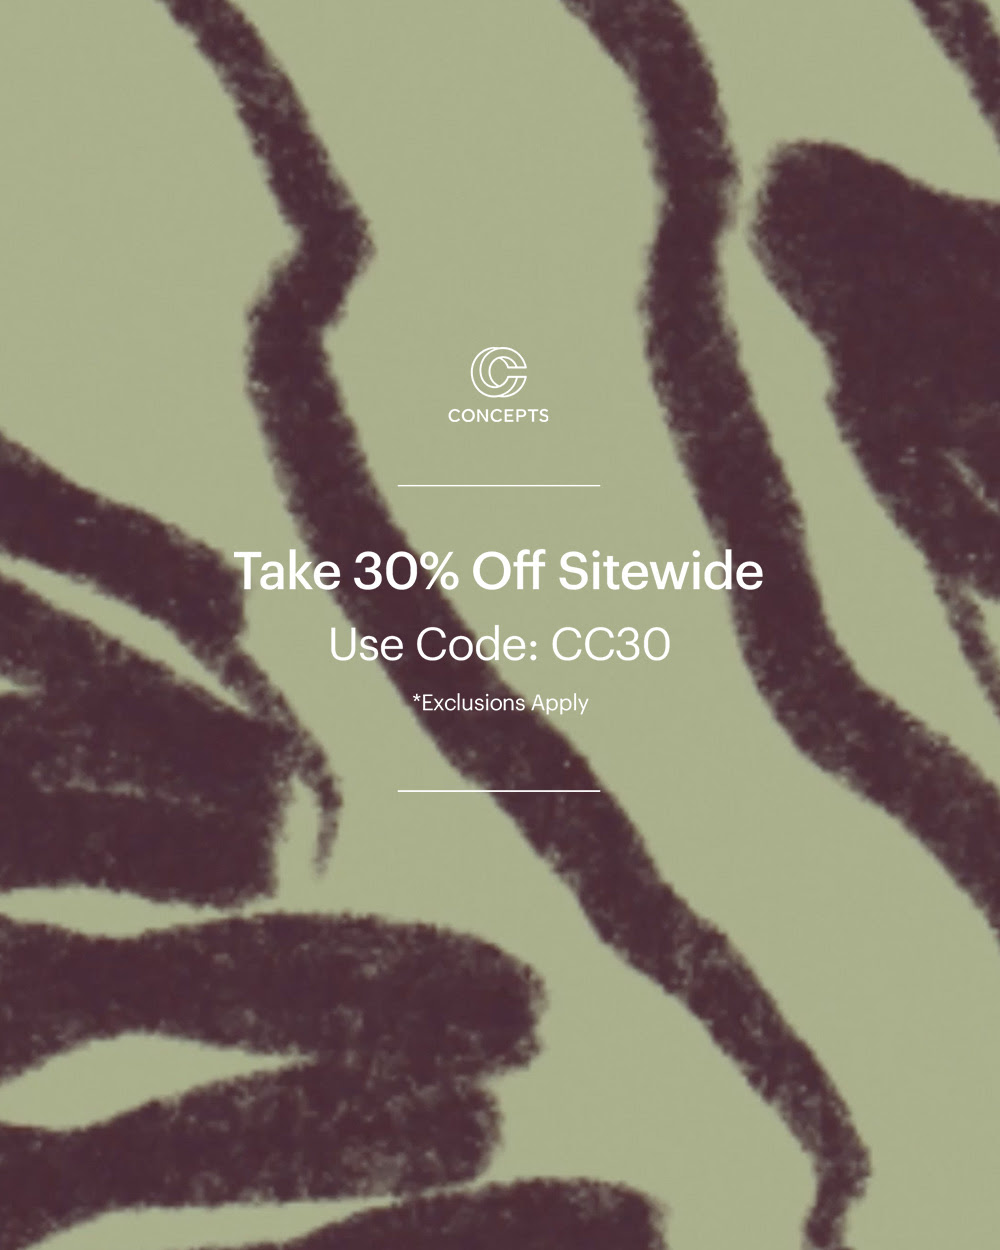 Take 30% Off Sitewide